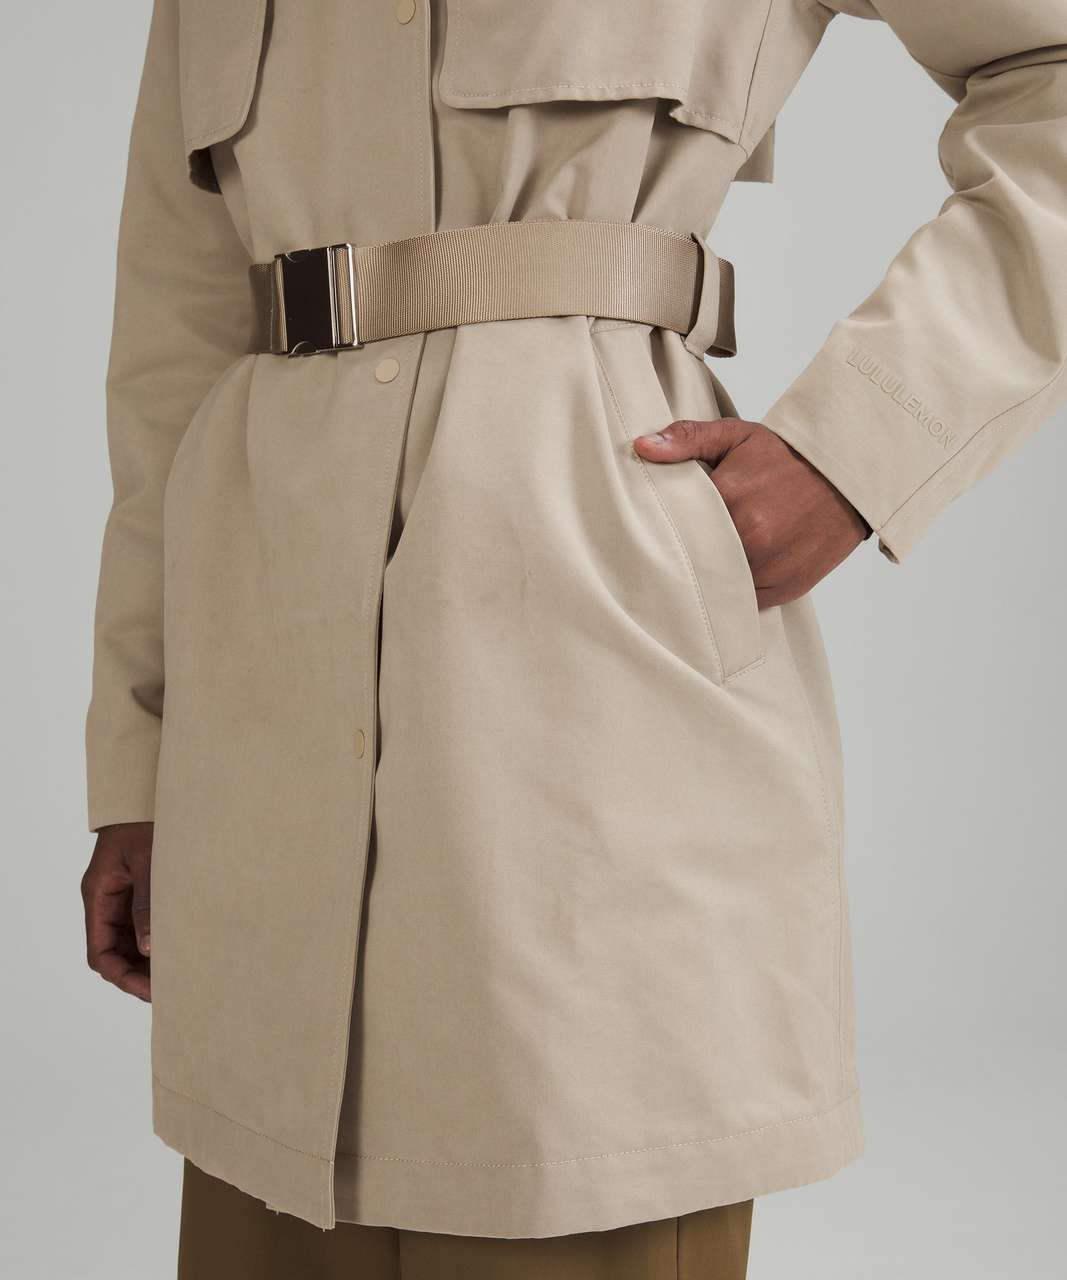 Lululemon Always There Short Trench Coat - Raw Linen